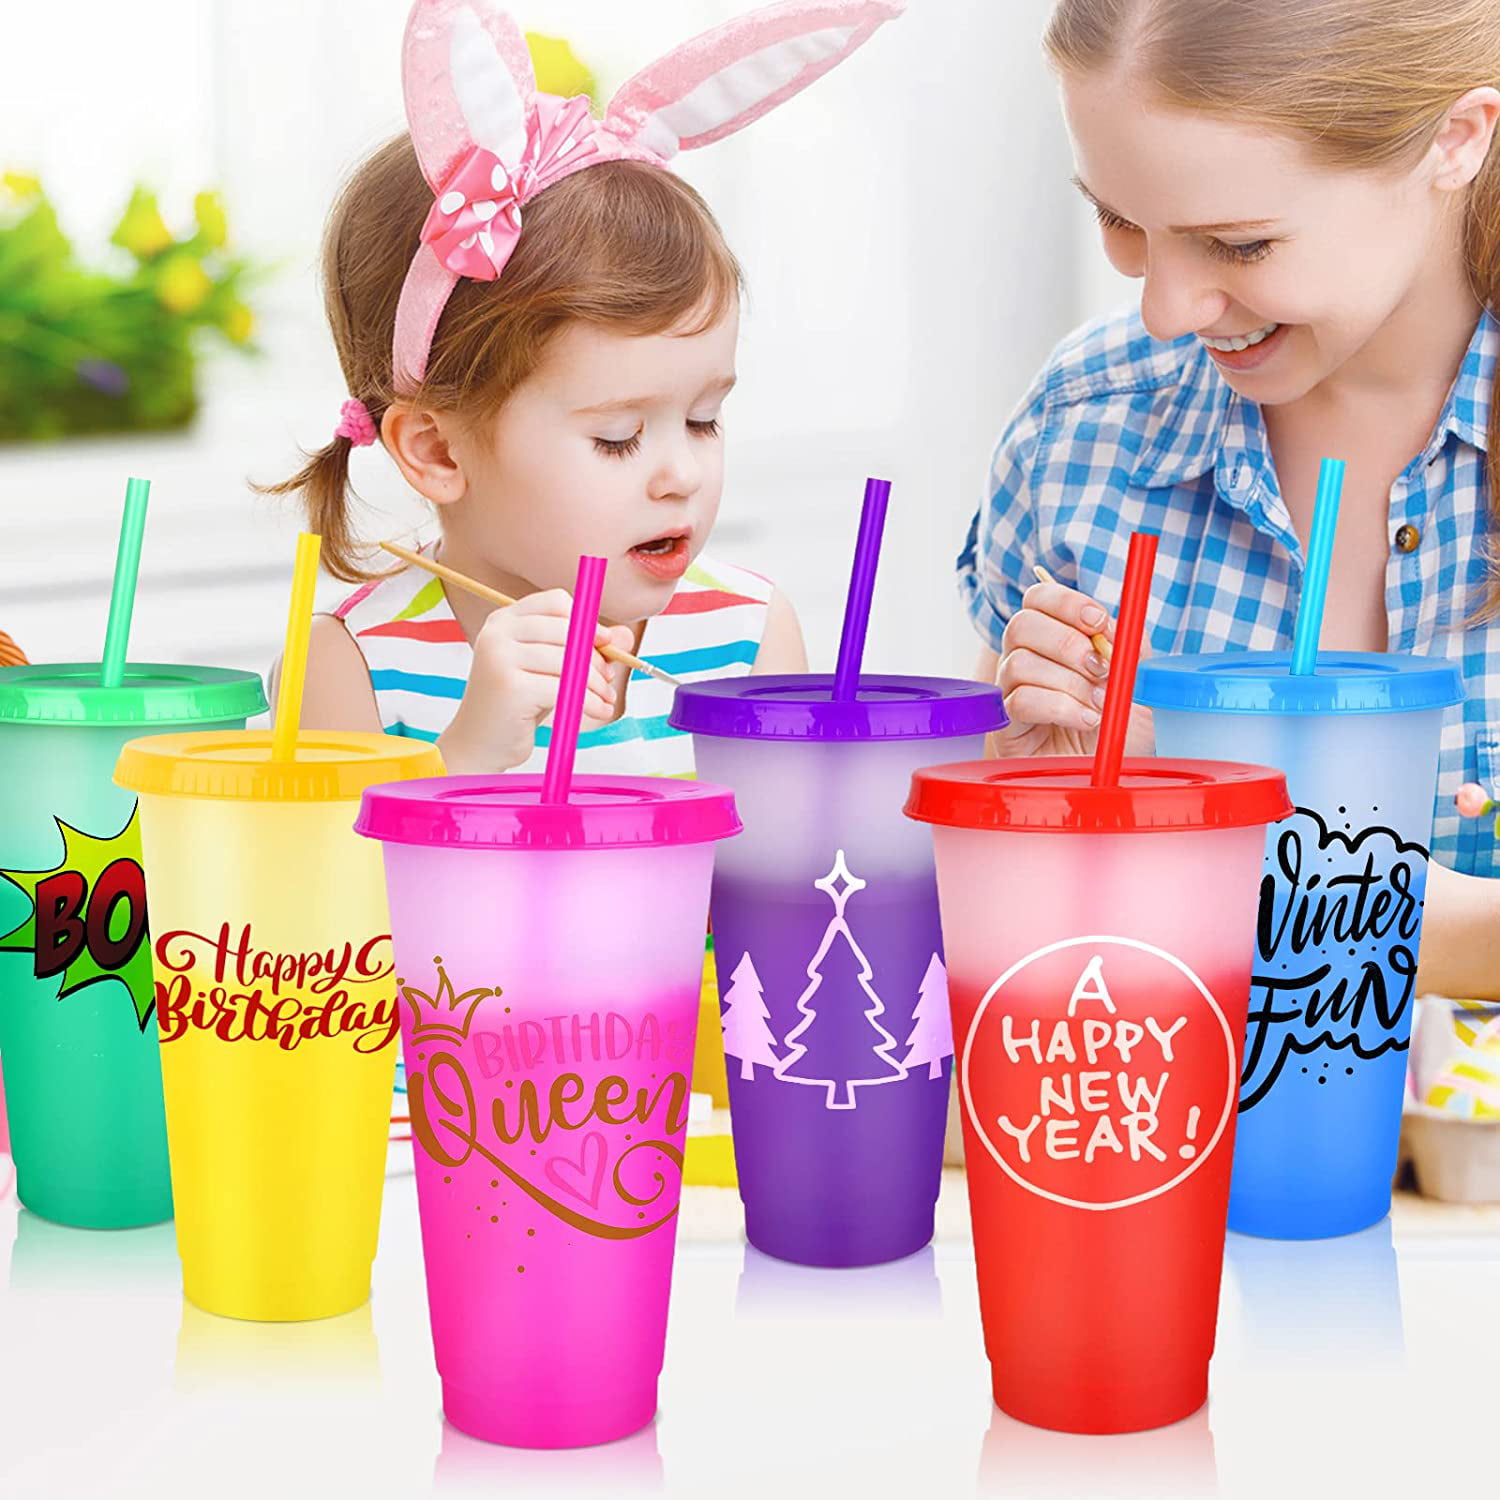 ChainPlus Color Changing Cups with Lids and Straws - 7 Pack 16 oz Plastic  Tumblers with Lids and Straws Bulk, Christmas Gifts for Women, Xmas Party  Favors for Friends 